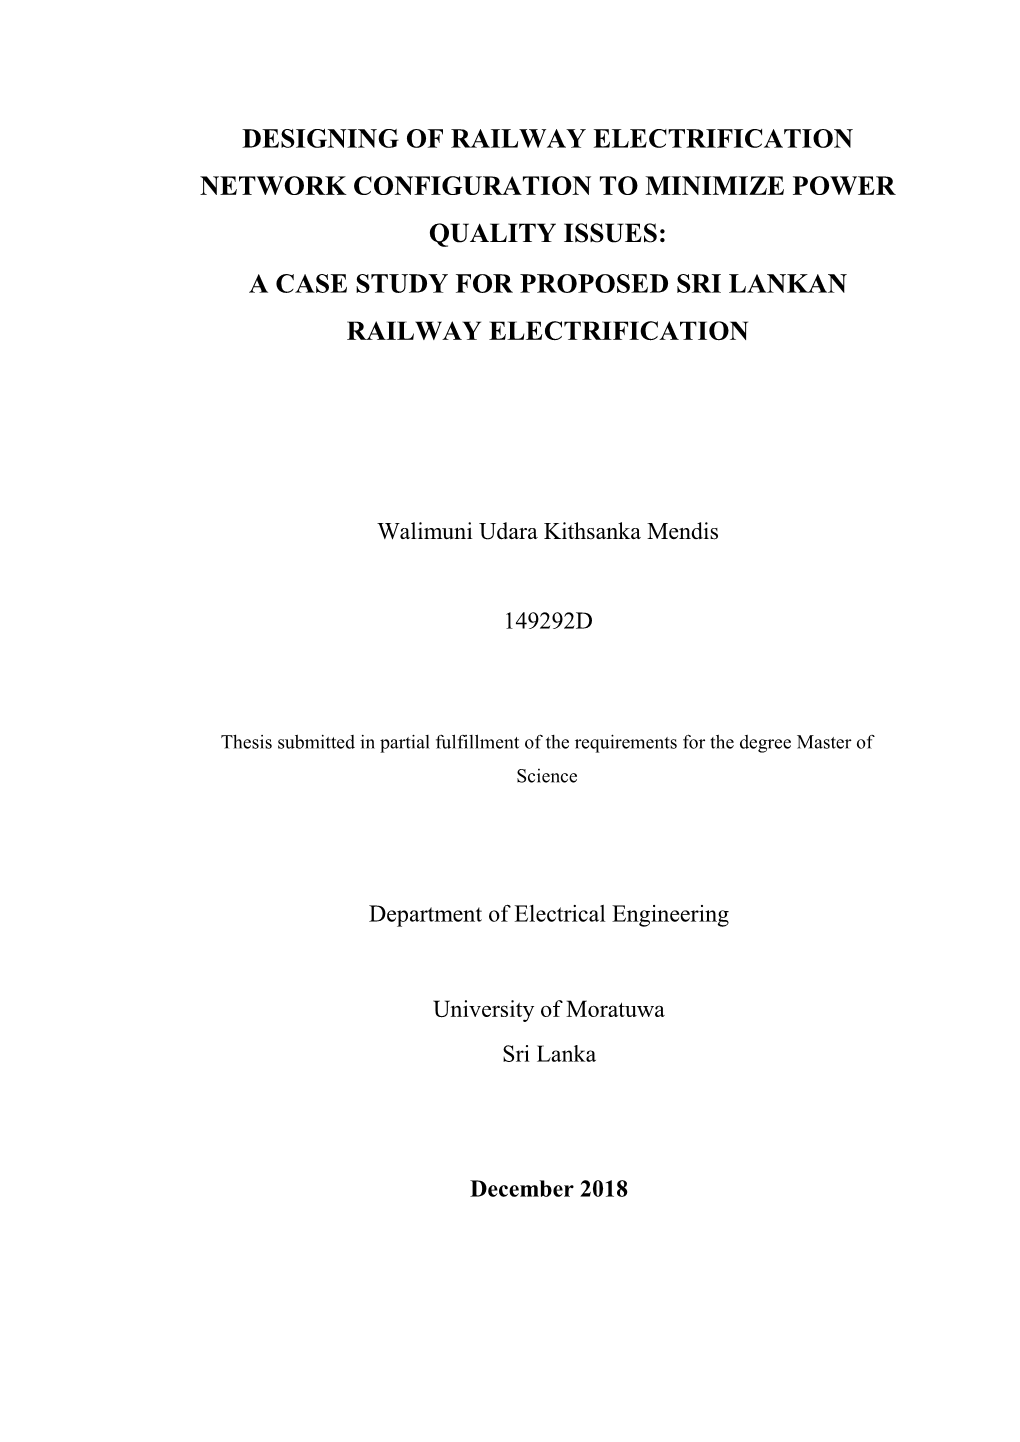 Designing of Railway Electrification Network Configuration to Minimize Power Quality Issues: a Case Study for Proposed Sri Lankan Railway Electrification